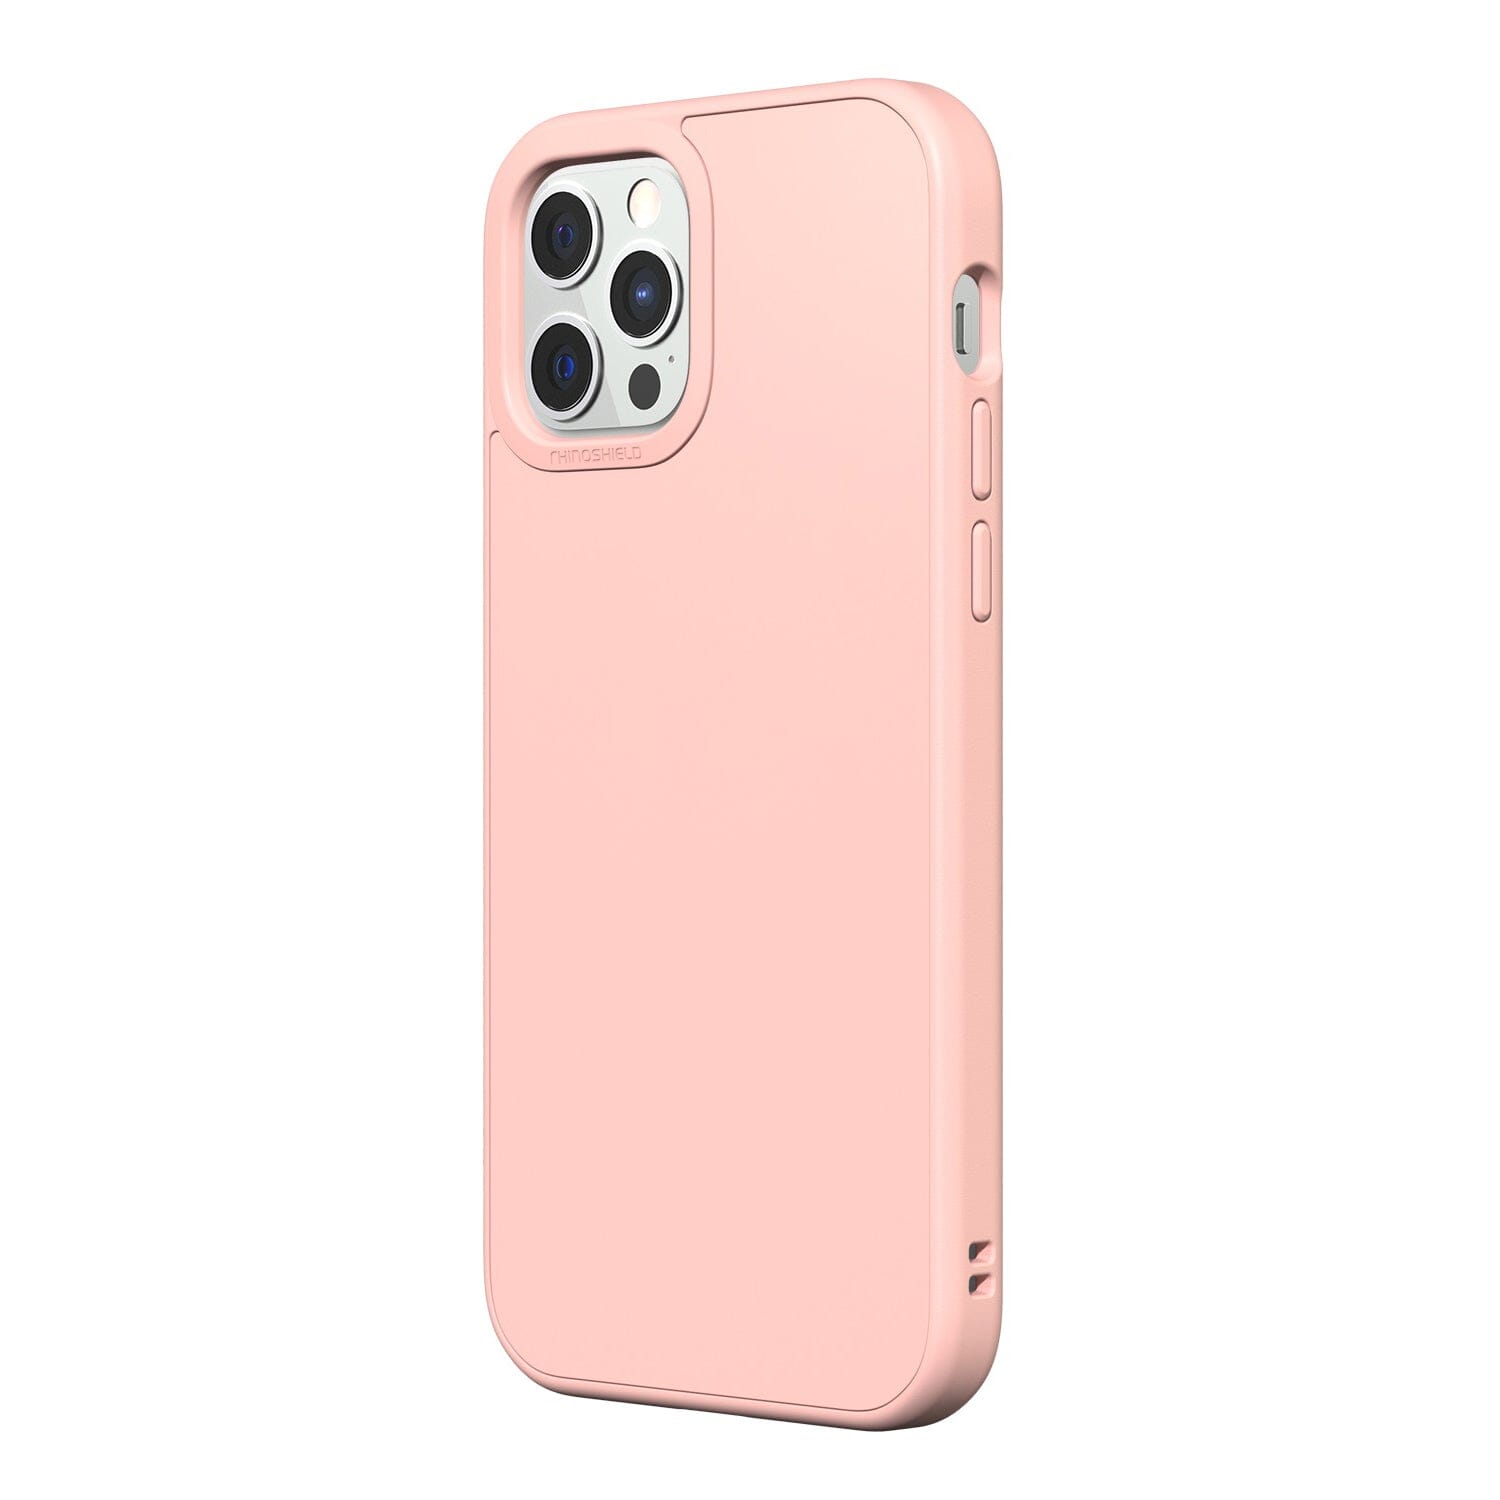 RhinoShield SolidSuit Protective Case with Premium Finish for iPhone 12 Series (2020) iPhone 12 Series RhinoShield iPhone 12 Pro Max 6.7" Classic Blush Pink 